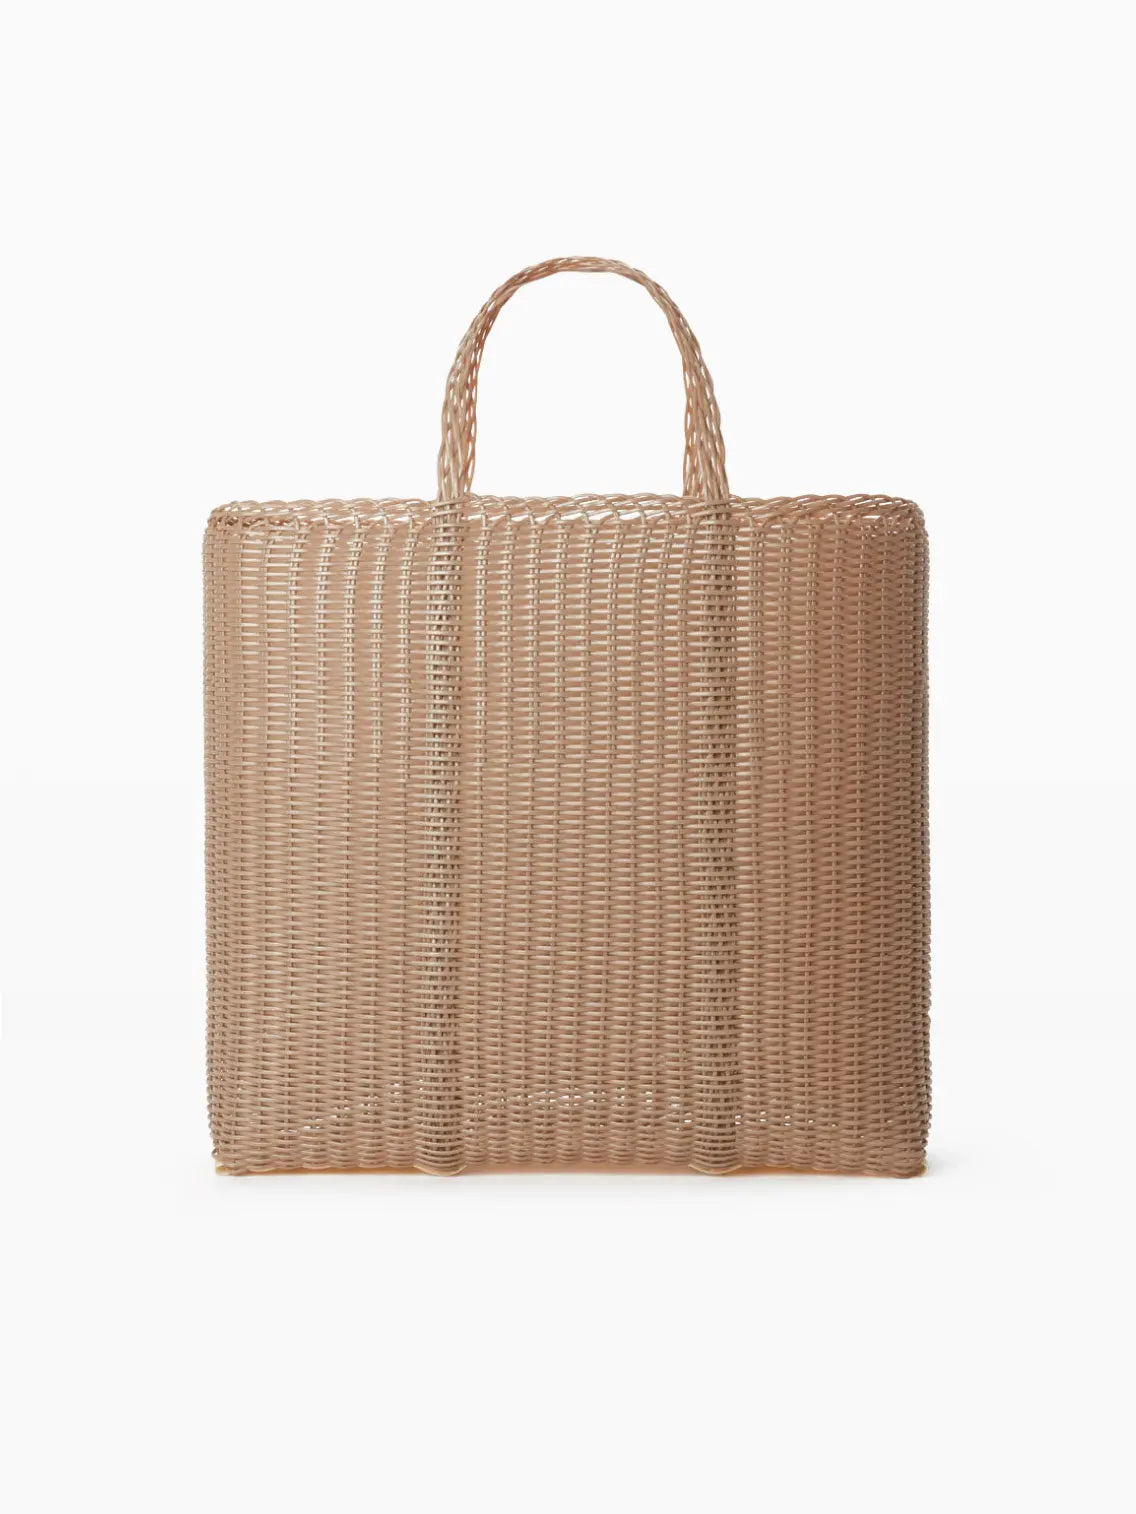 A Palorosa Flat Large Powder Bag from Bassalstore with two short handles is placed against a white background. The rectangular-shaped bag, inspired by Barcelona's chic style, features a grid-like pattern created by the interlacing material.